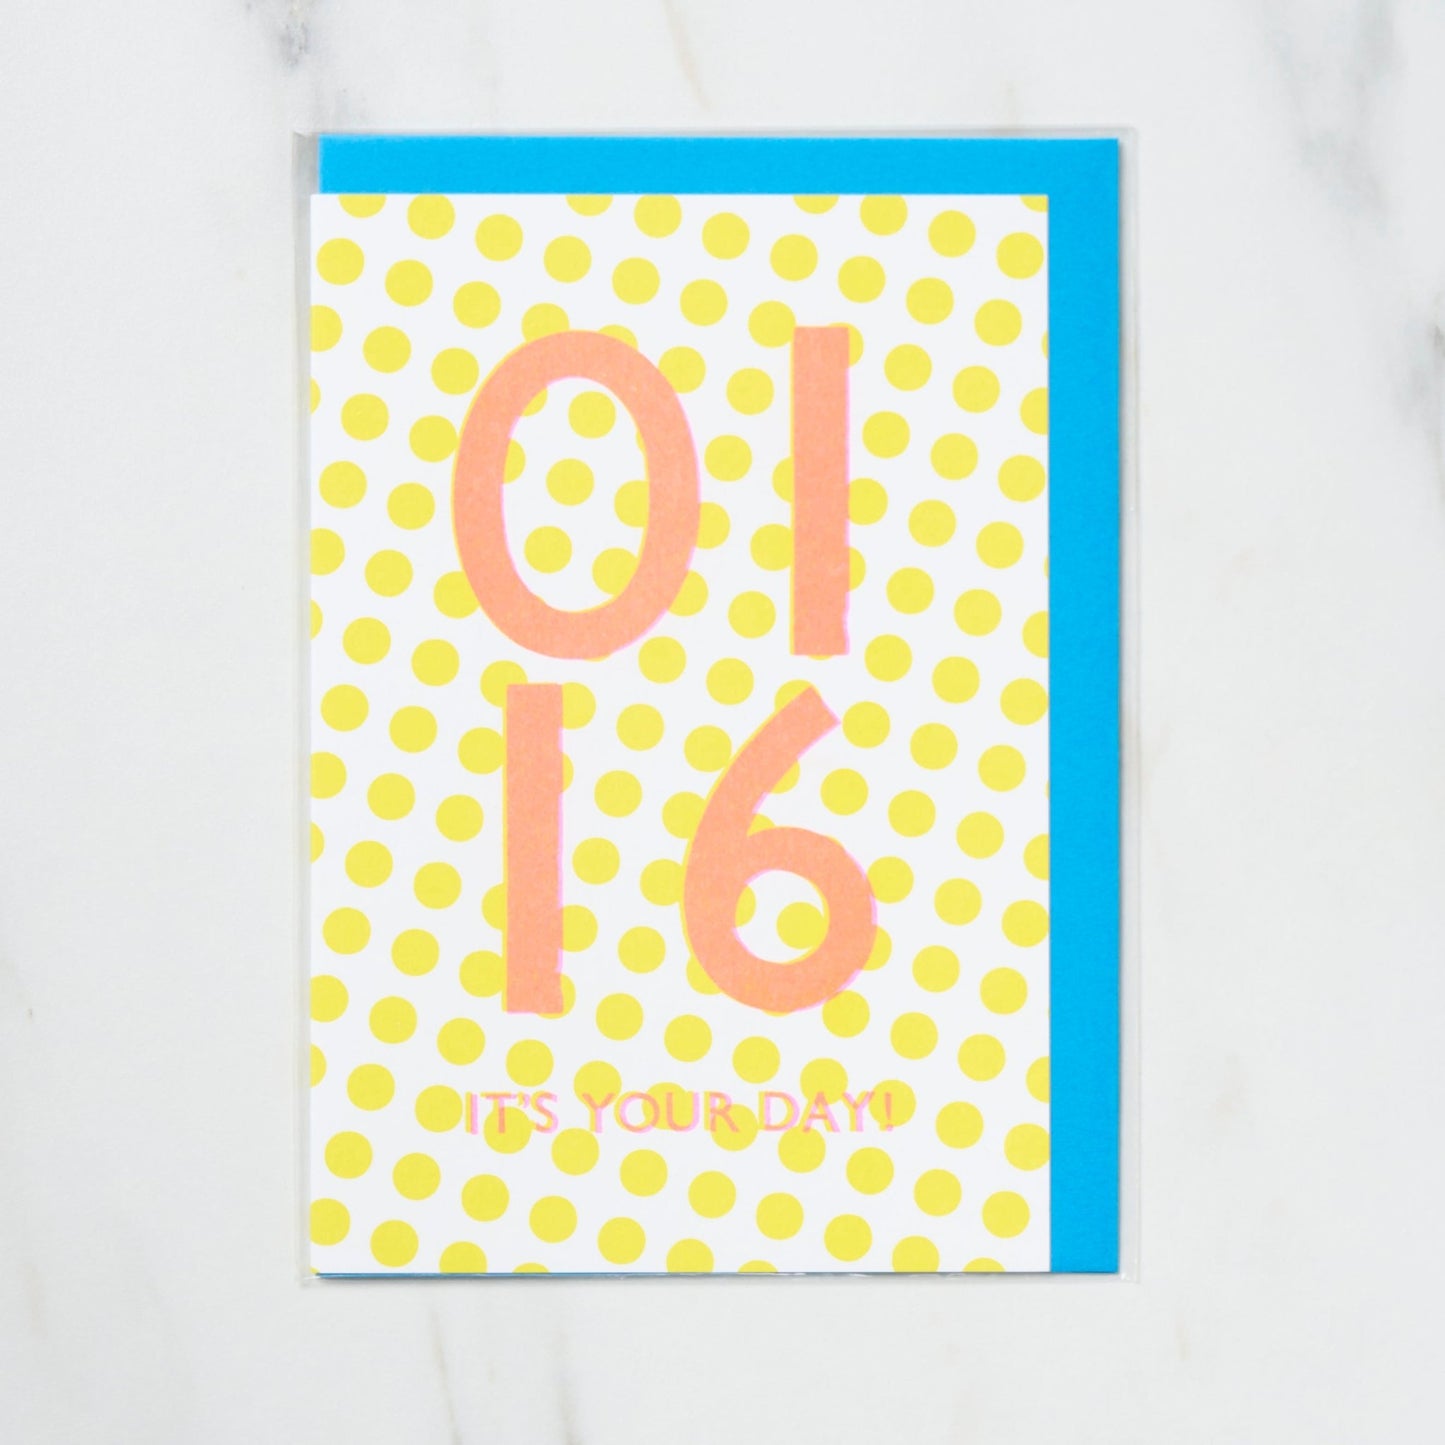 365 Find Your Day Card JANUARY / Letterpress Letter